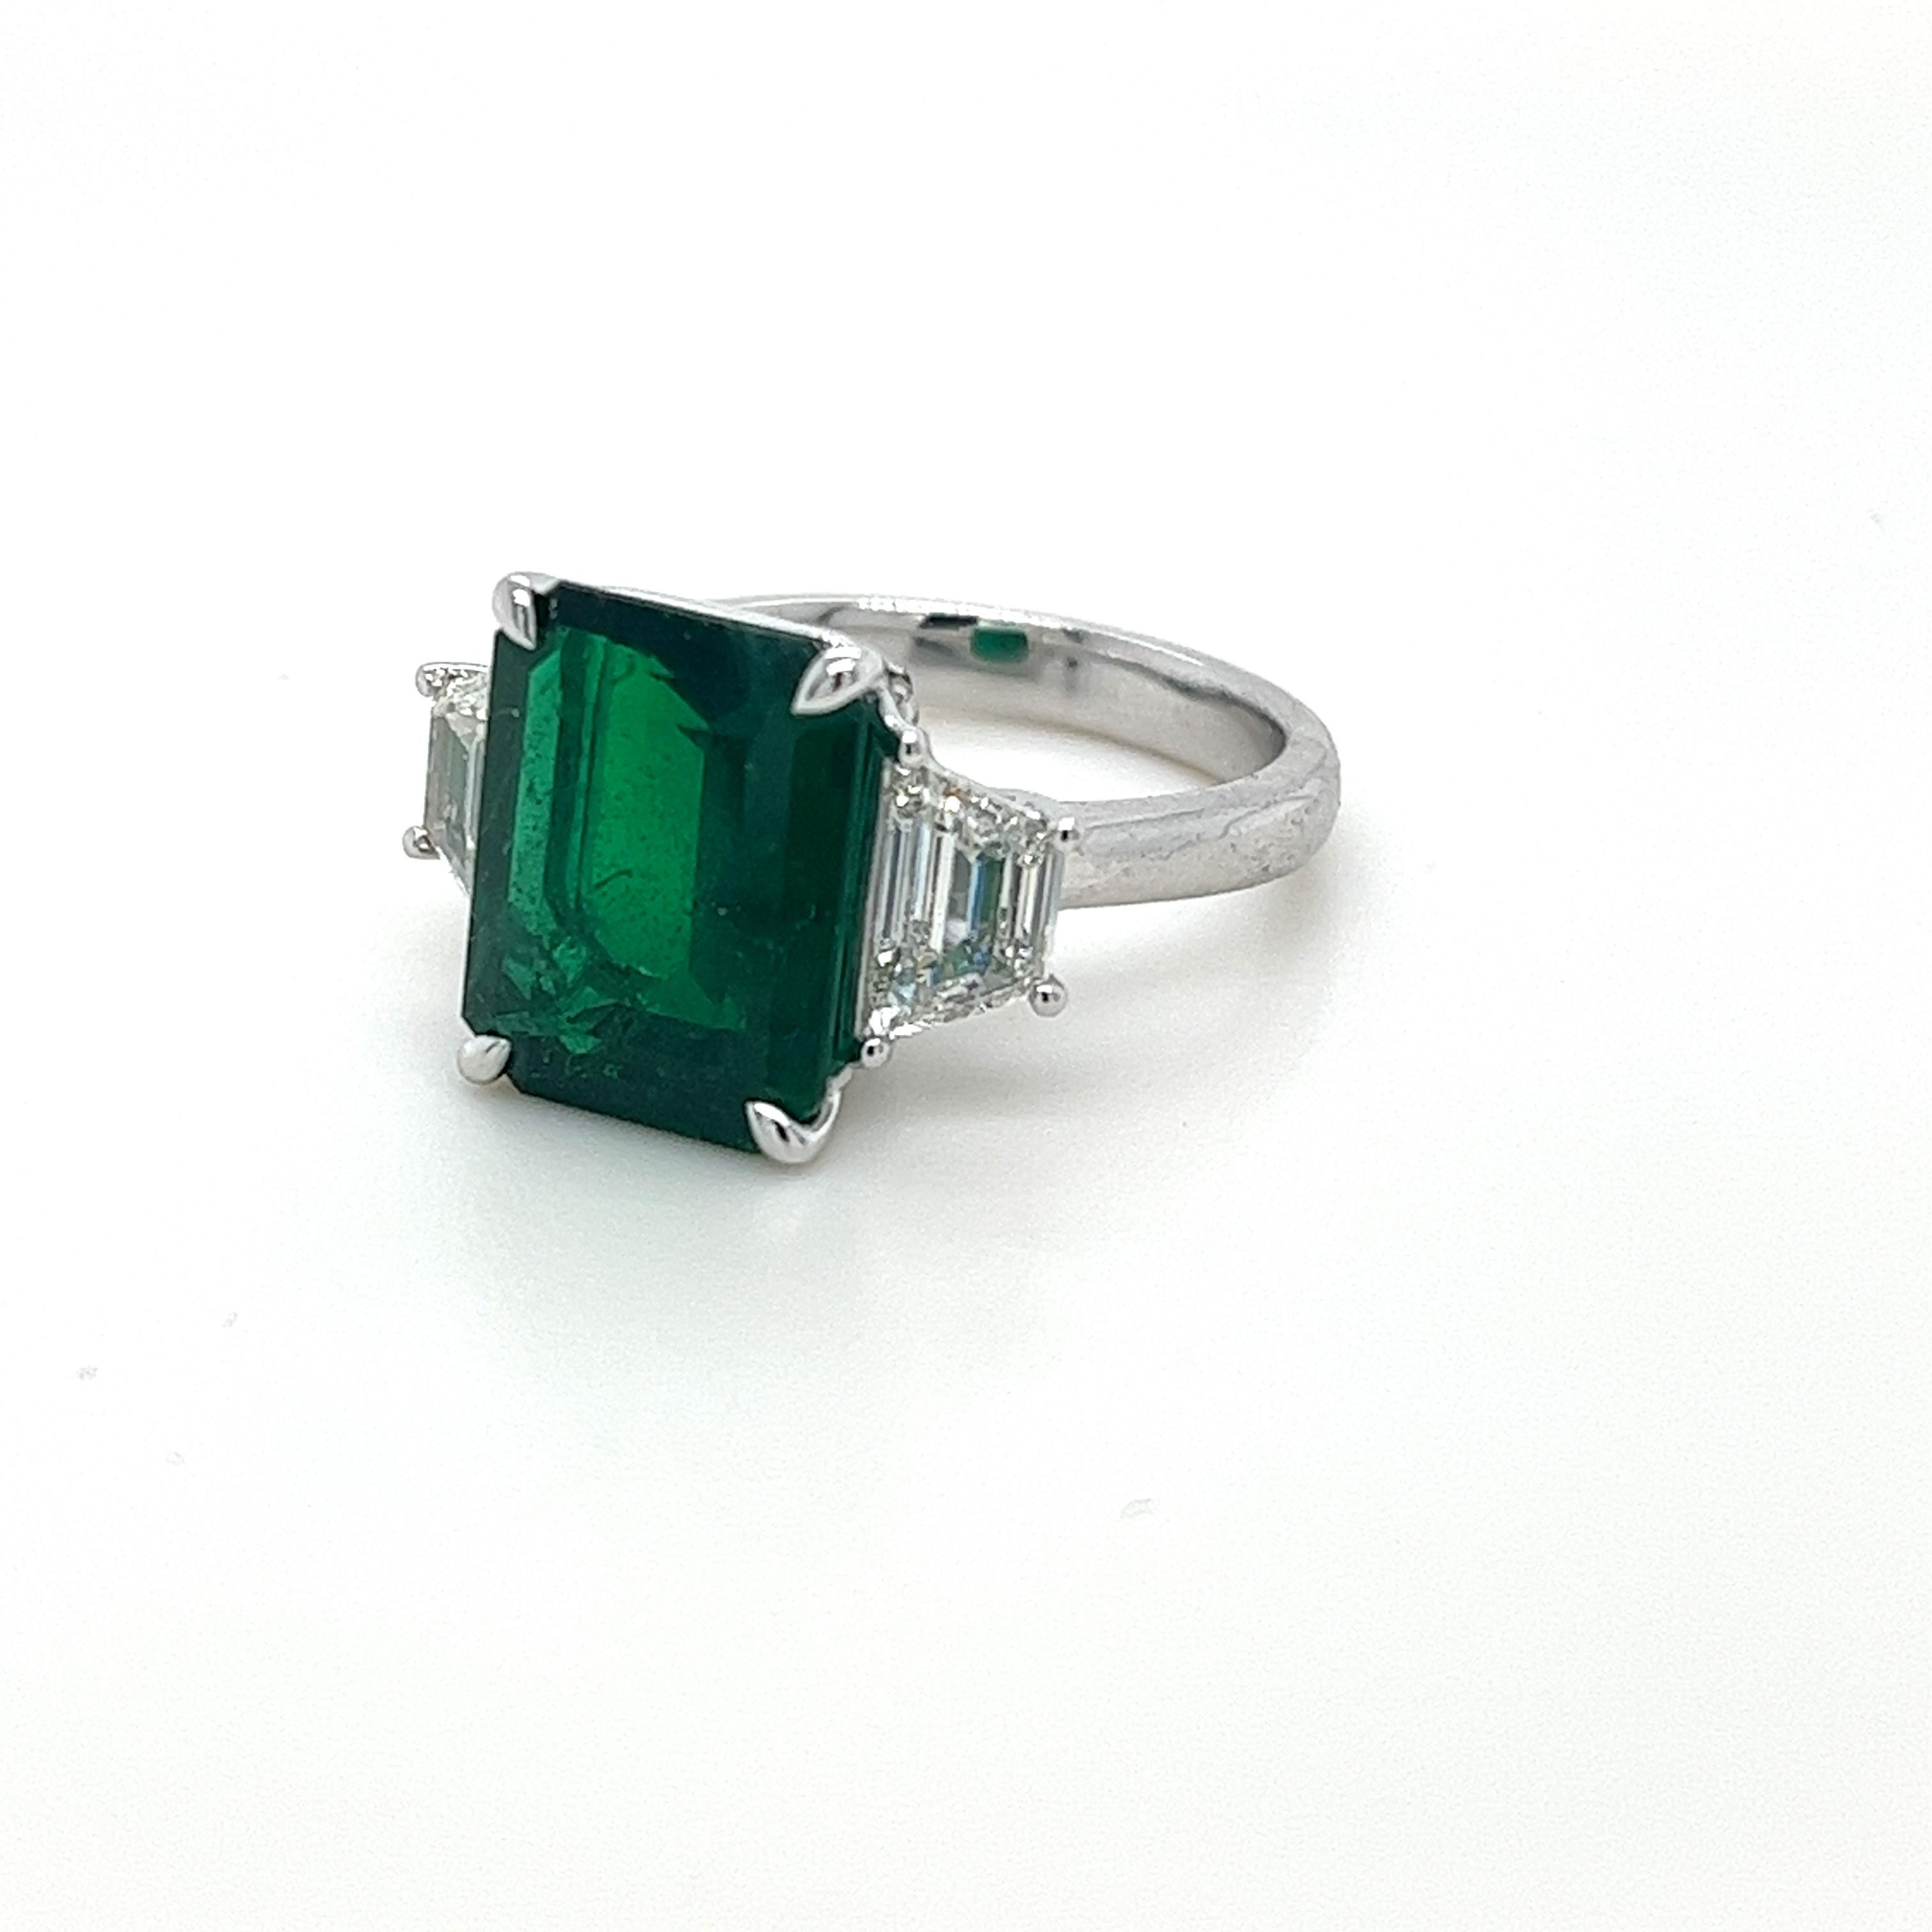 Emerald Cut Emerald weighing 5.03 carats
Measuring (12.5x9.9) mm
Trapezoid Diamonds weighing 1.02 cts
Diamonds are G-VS1
Set in platinum ring
8.30 grams
Emerald has rich green color